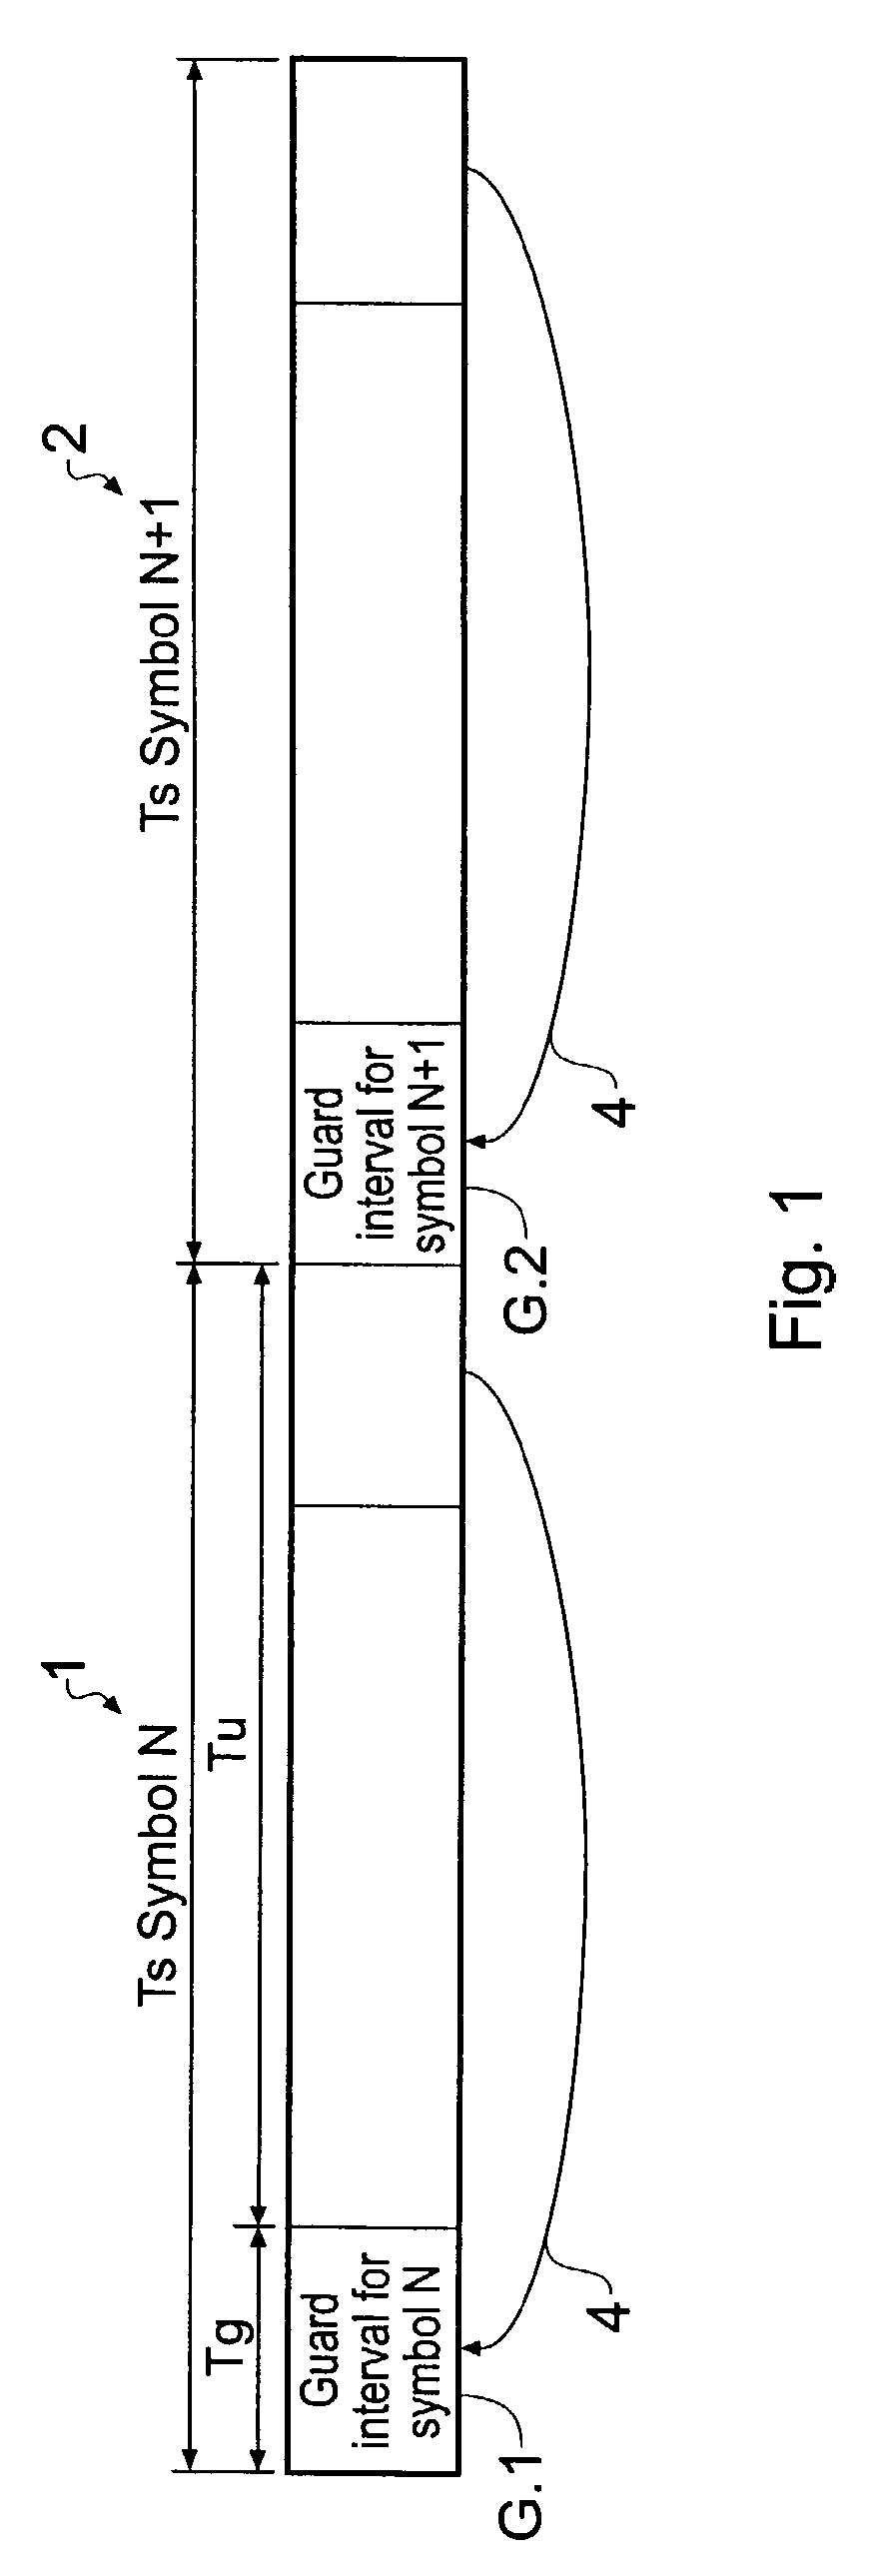 Receiver for a multi-carrier modulated symbol